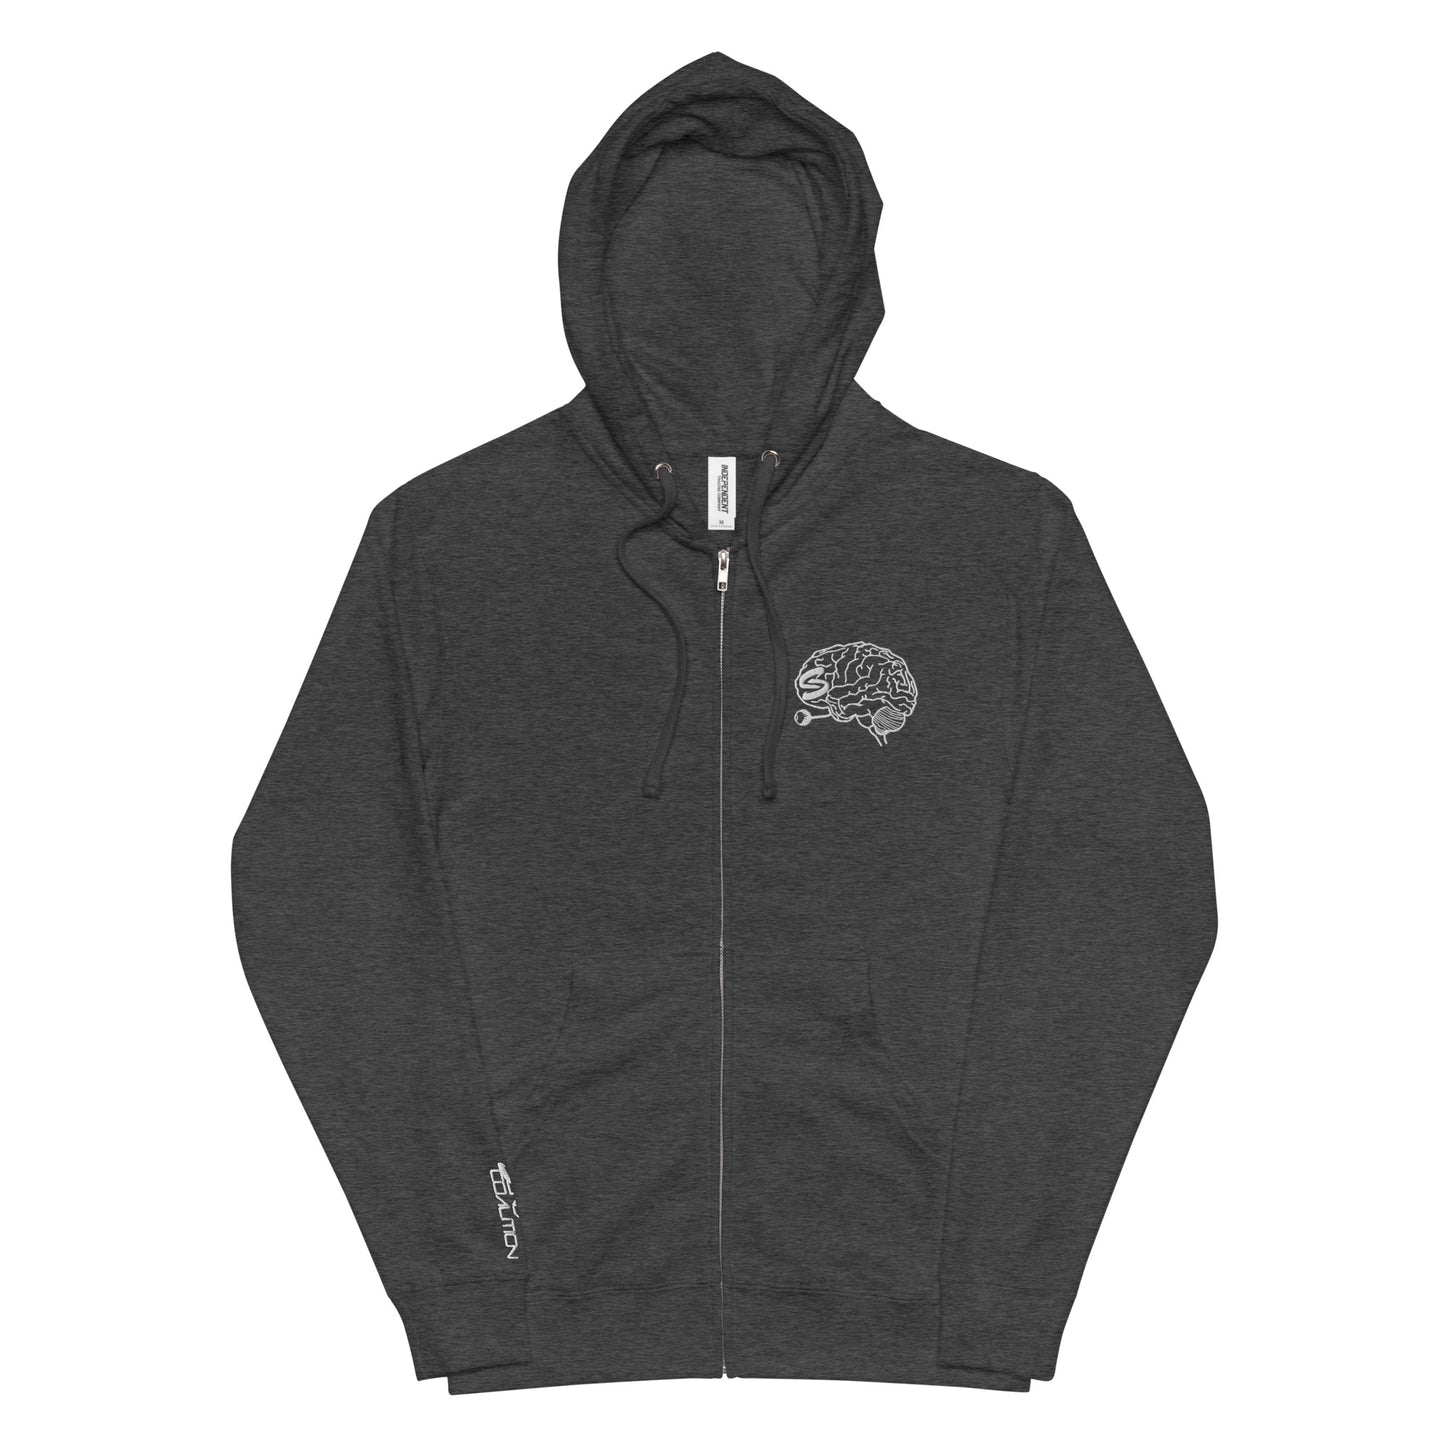 Thought Process Zip Hoodie